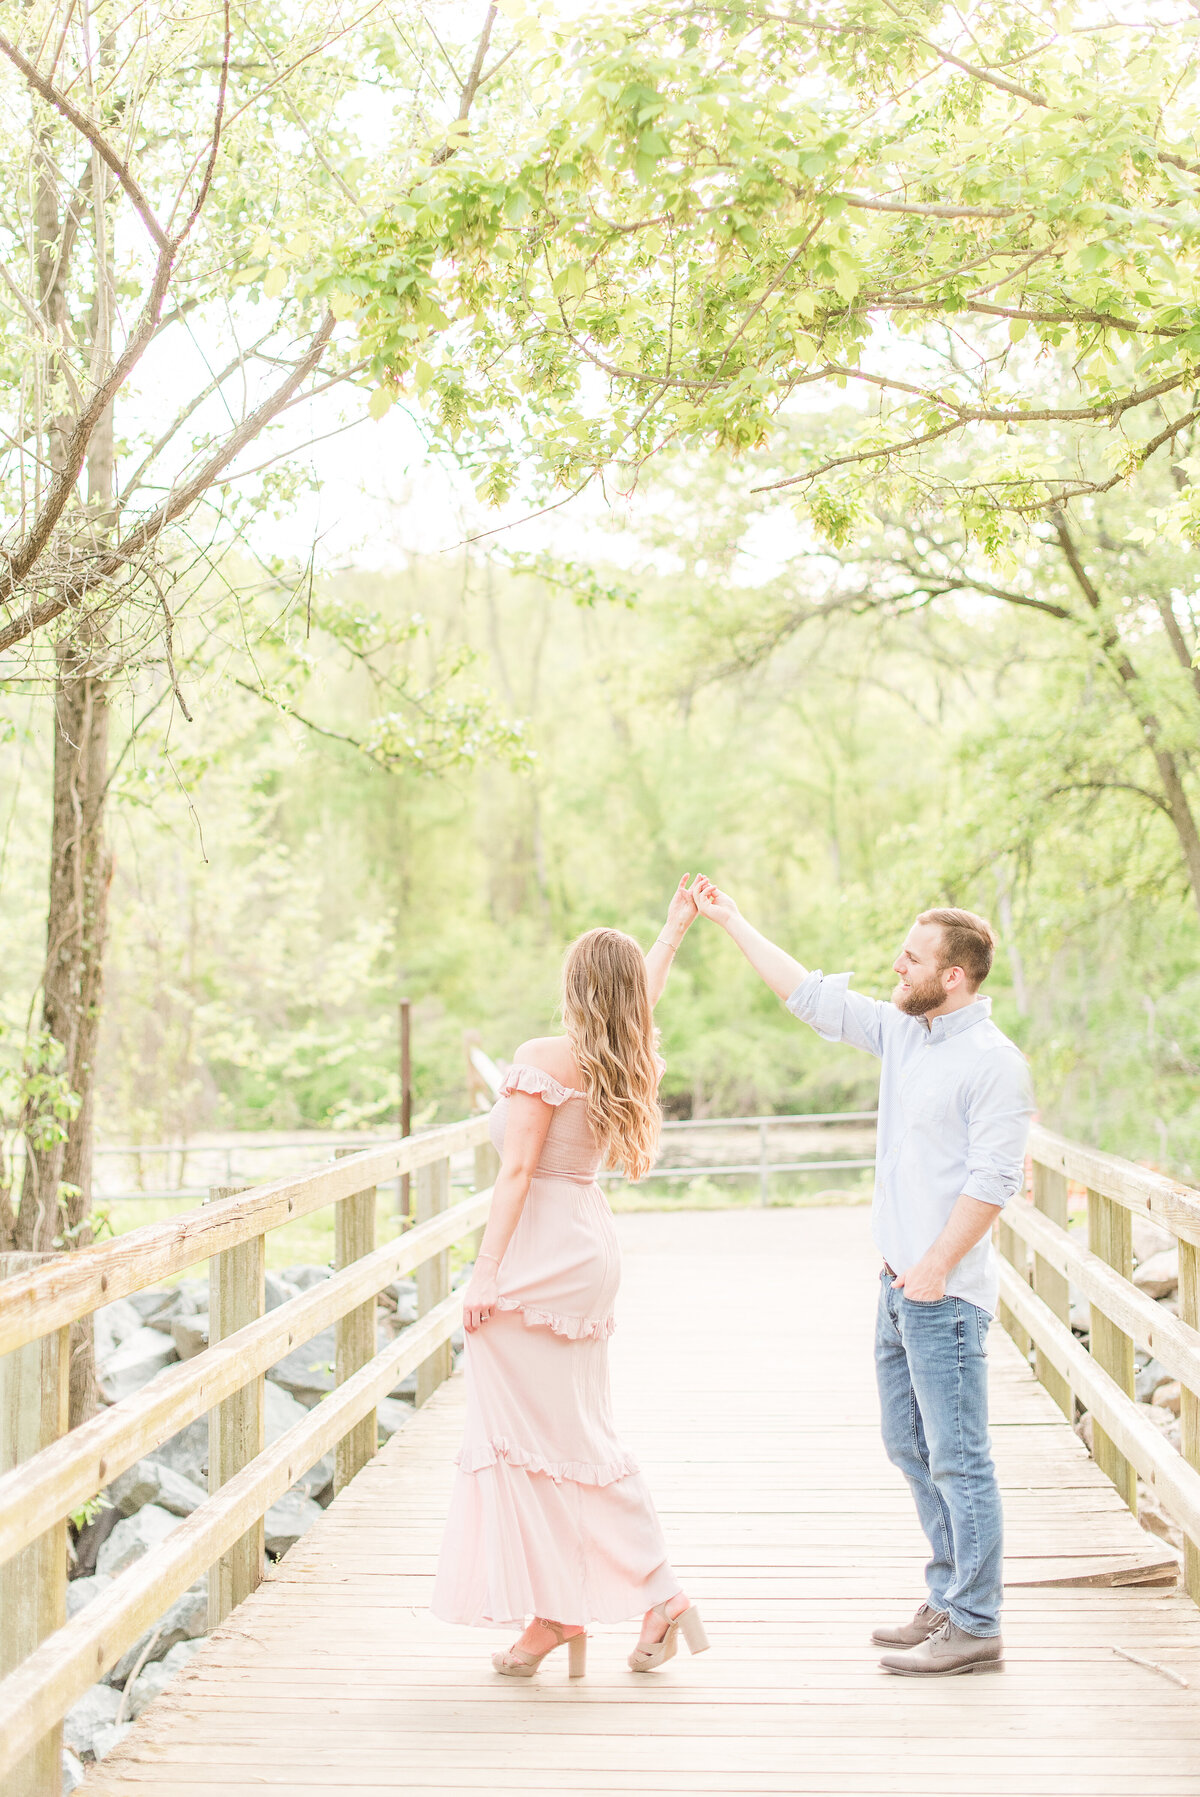 couple twirling on bridge pink maxidress and blue button up shirt